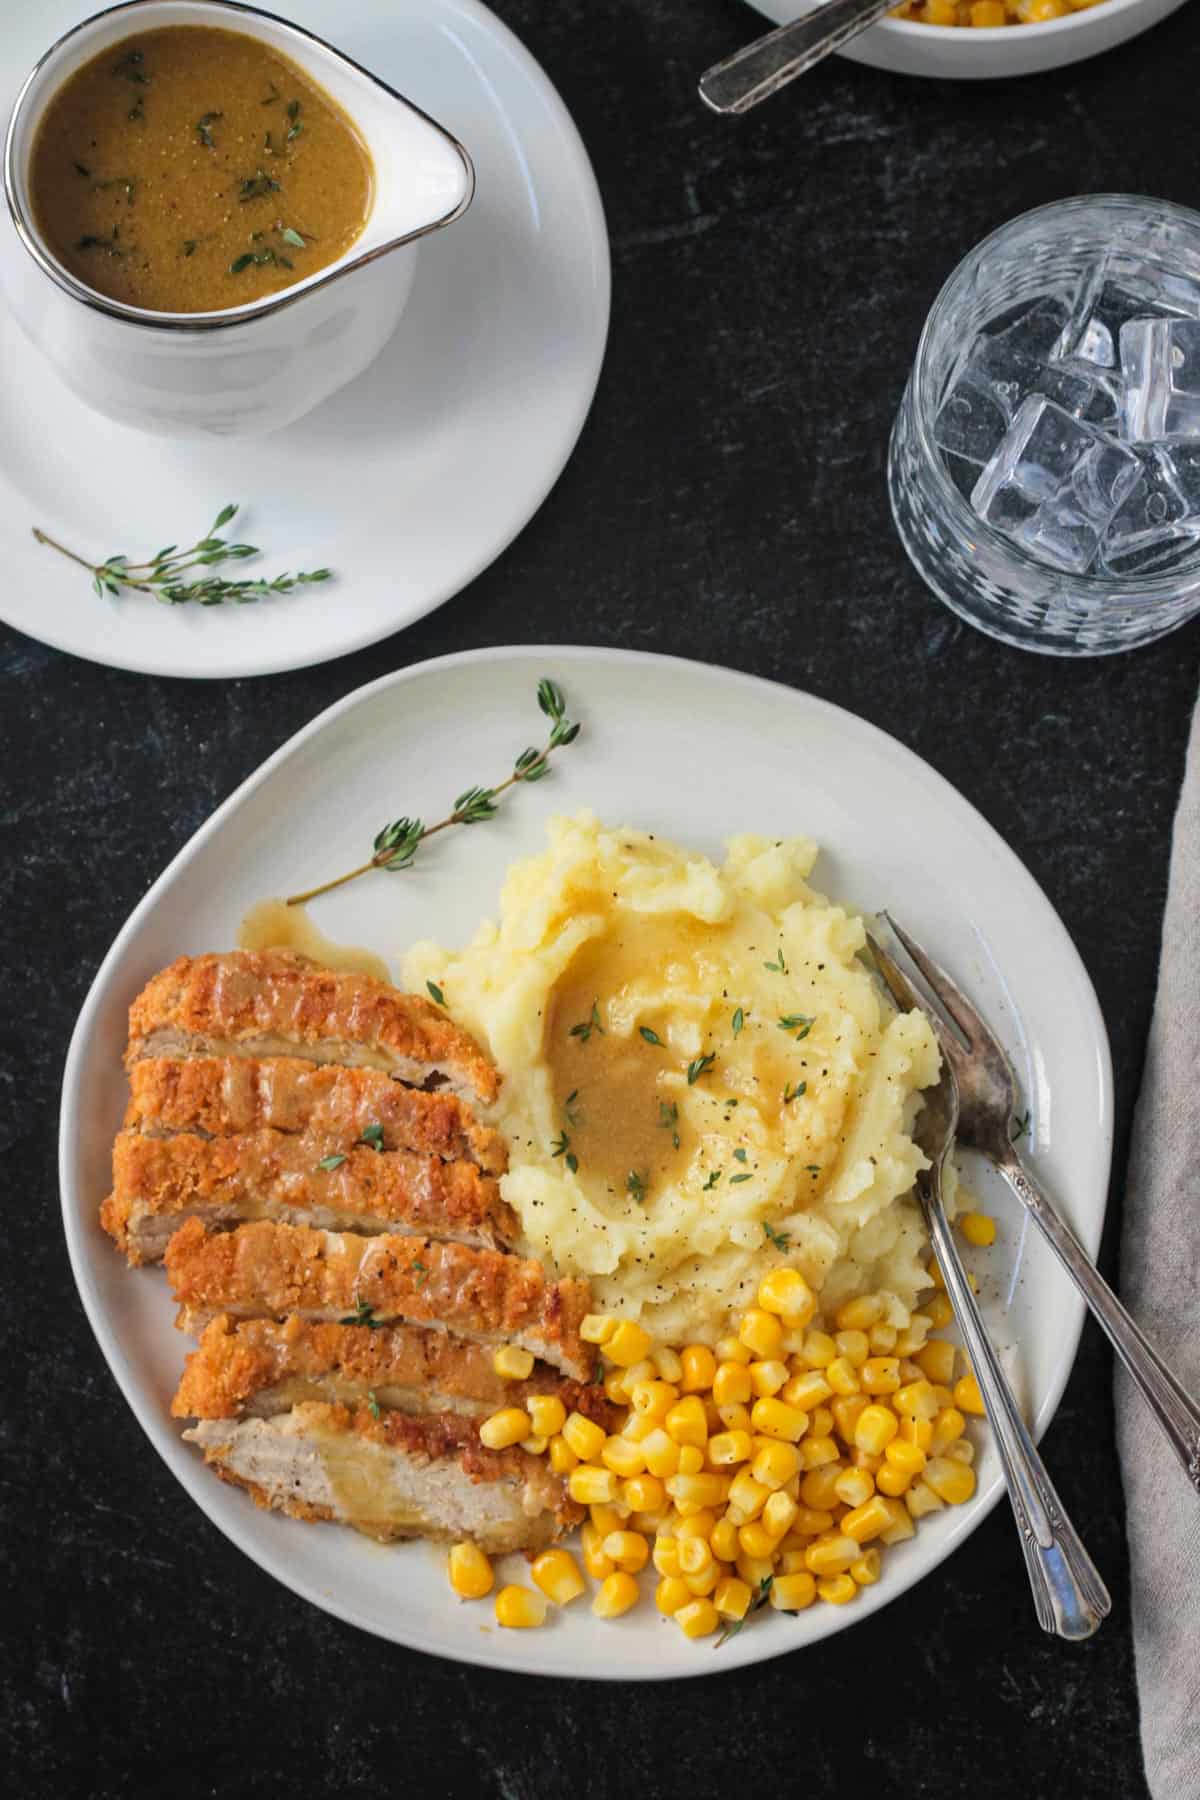 Dinner plate with sliced vegan chicken, corn, and mashed potatoes with gravy.